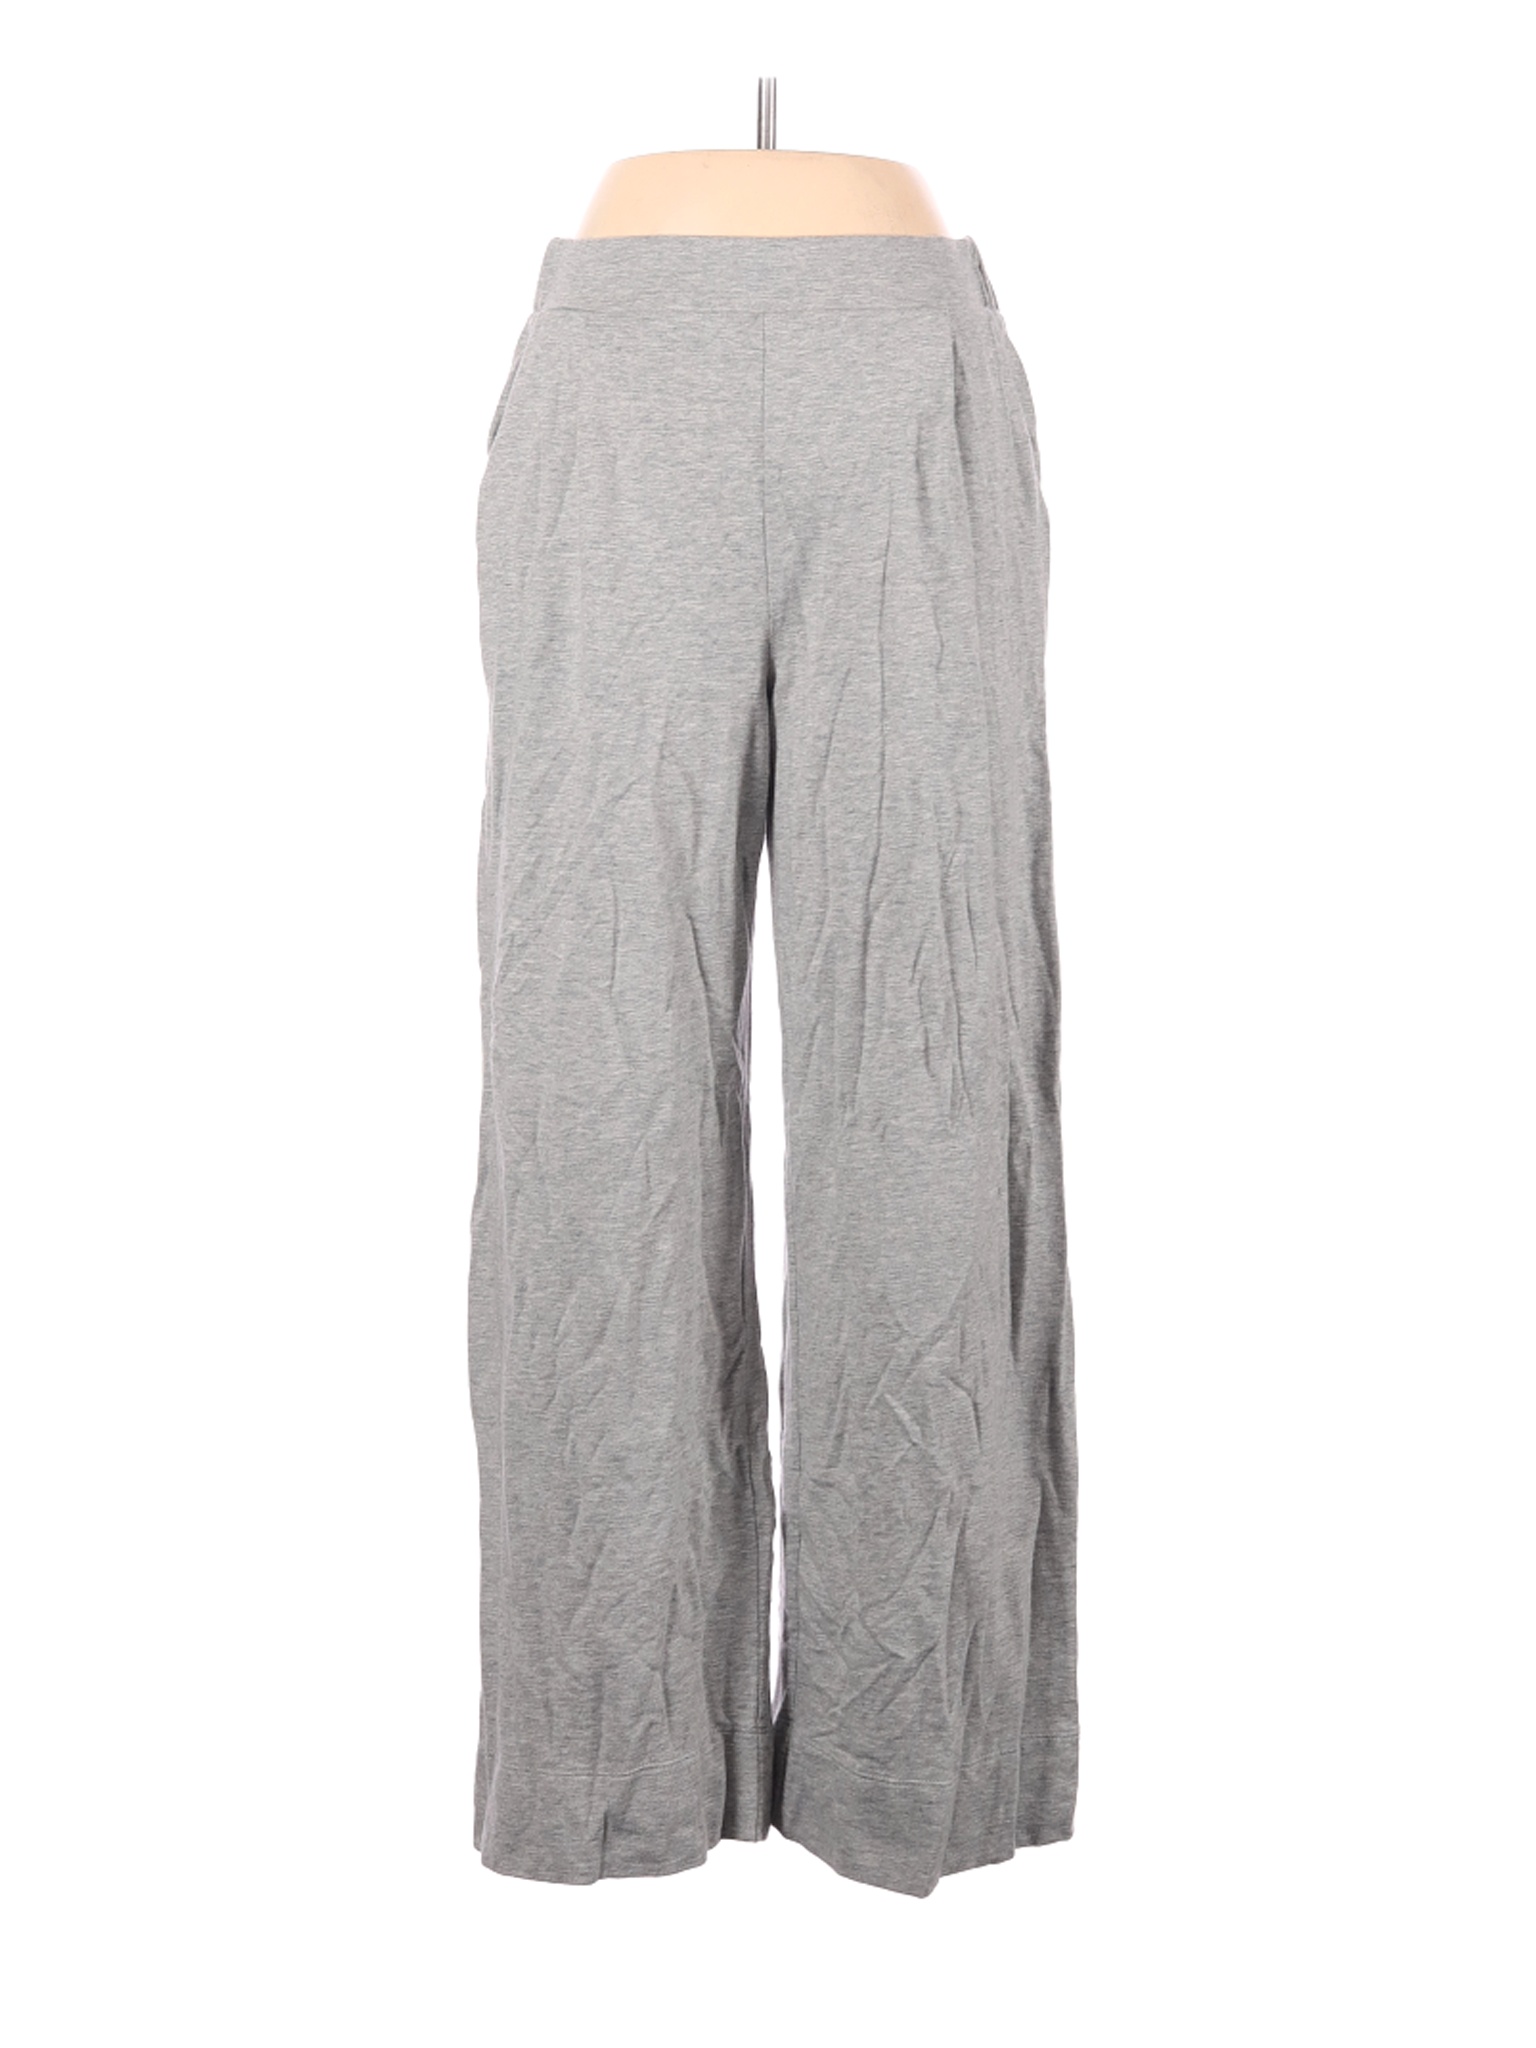 A New Day Women Gray Casual Pants M | eBay